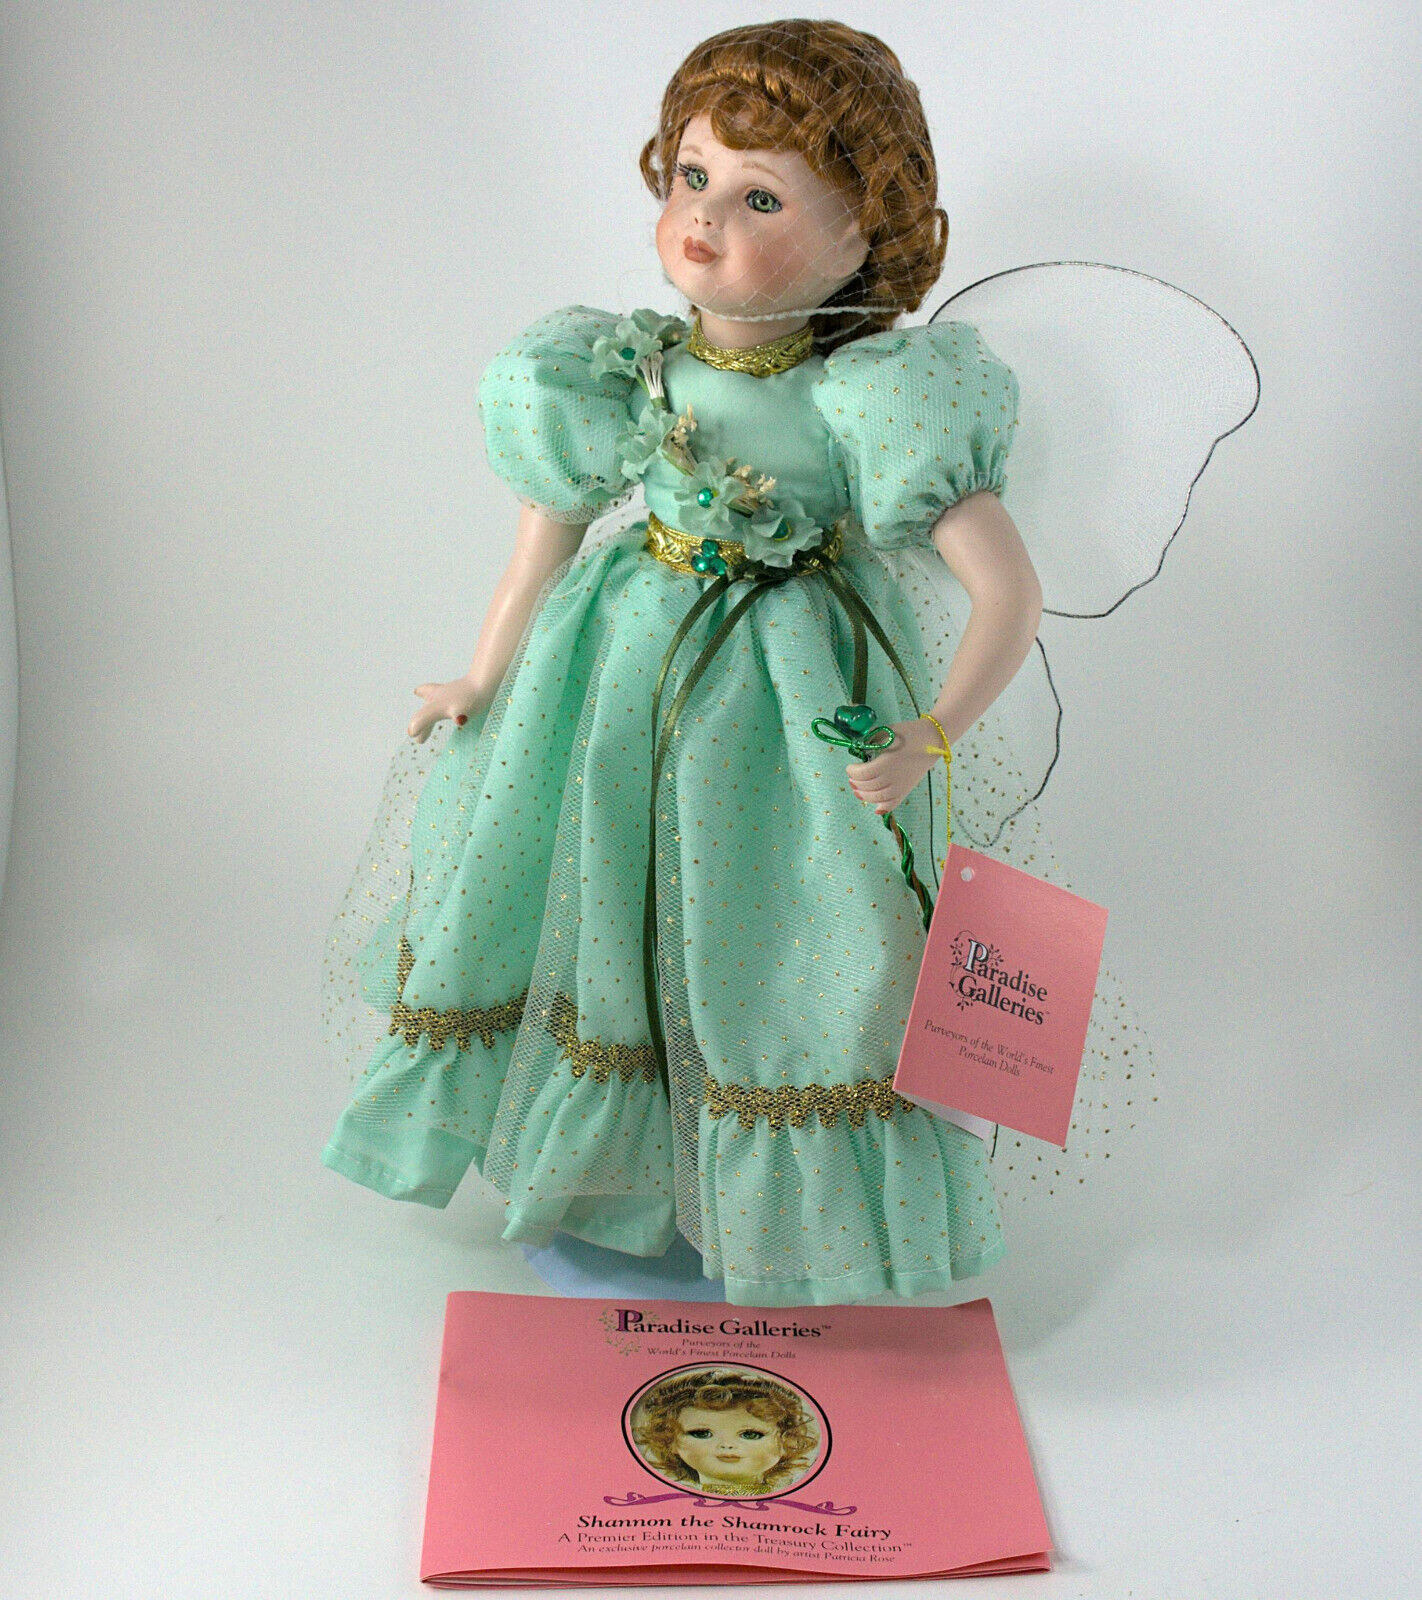 Shannon the Shamrock Fairy  Porcelain Doll Outfit Papers Box Paradise Galleries - $24.99